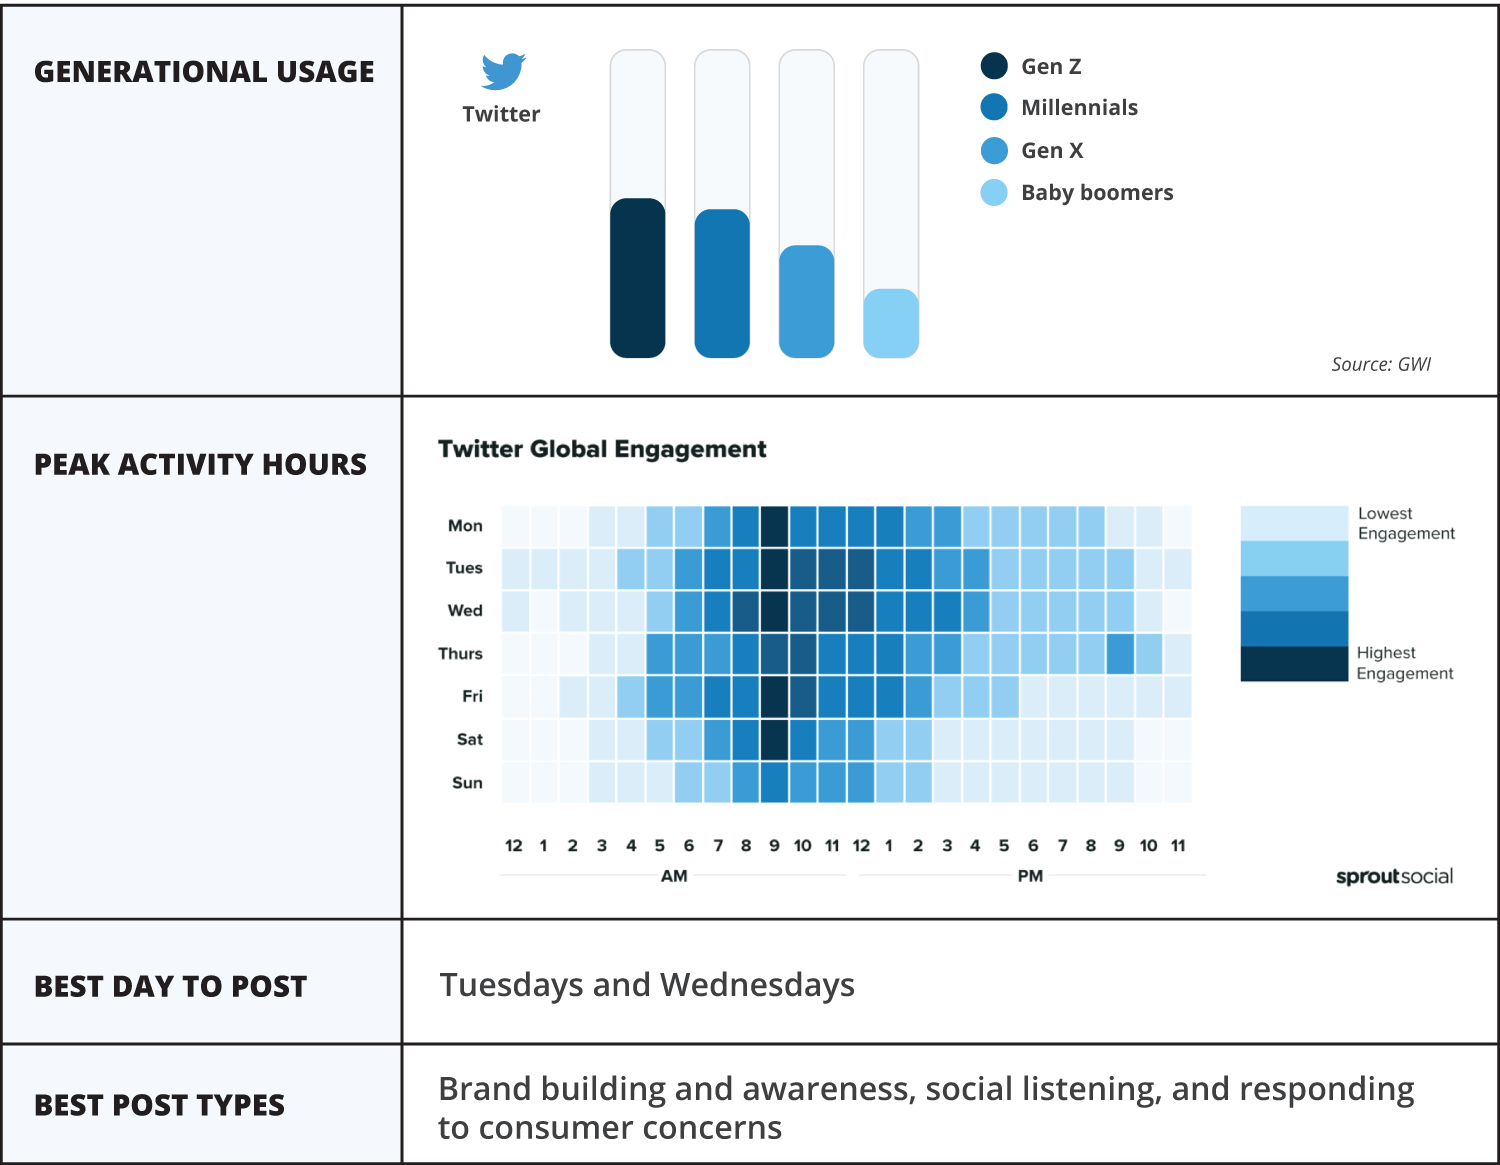 table or cheat sheet that highlights the key stats and graphs for Twitter